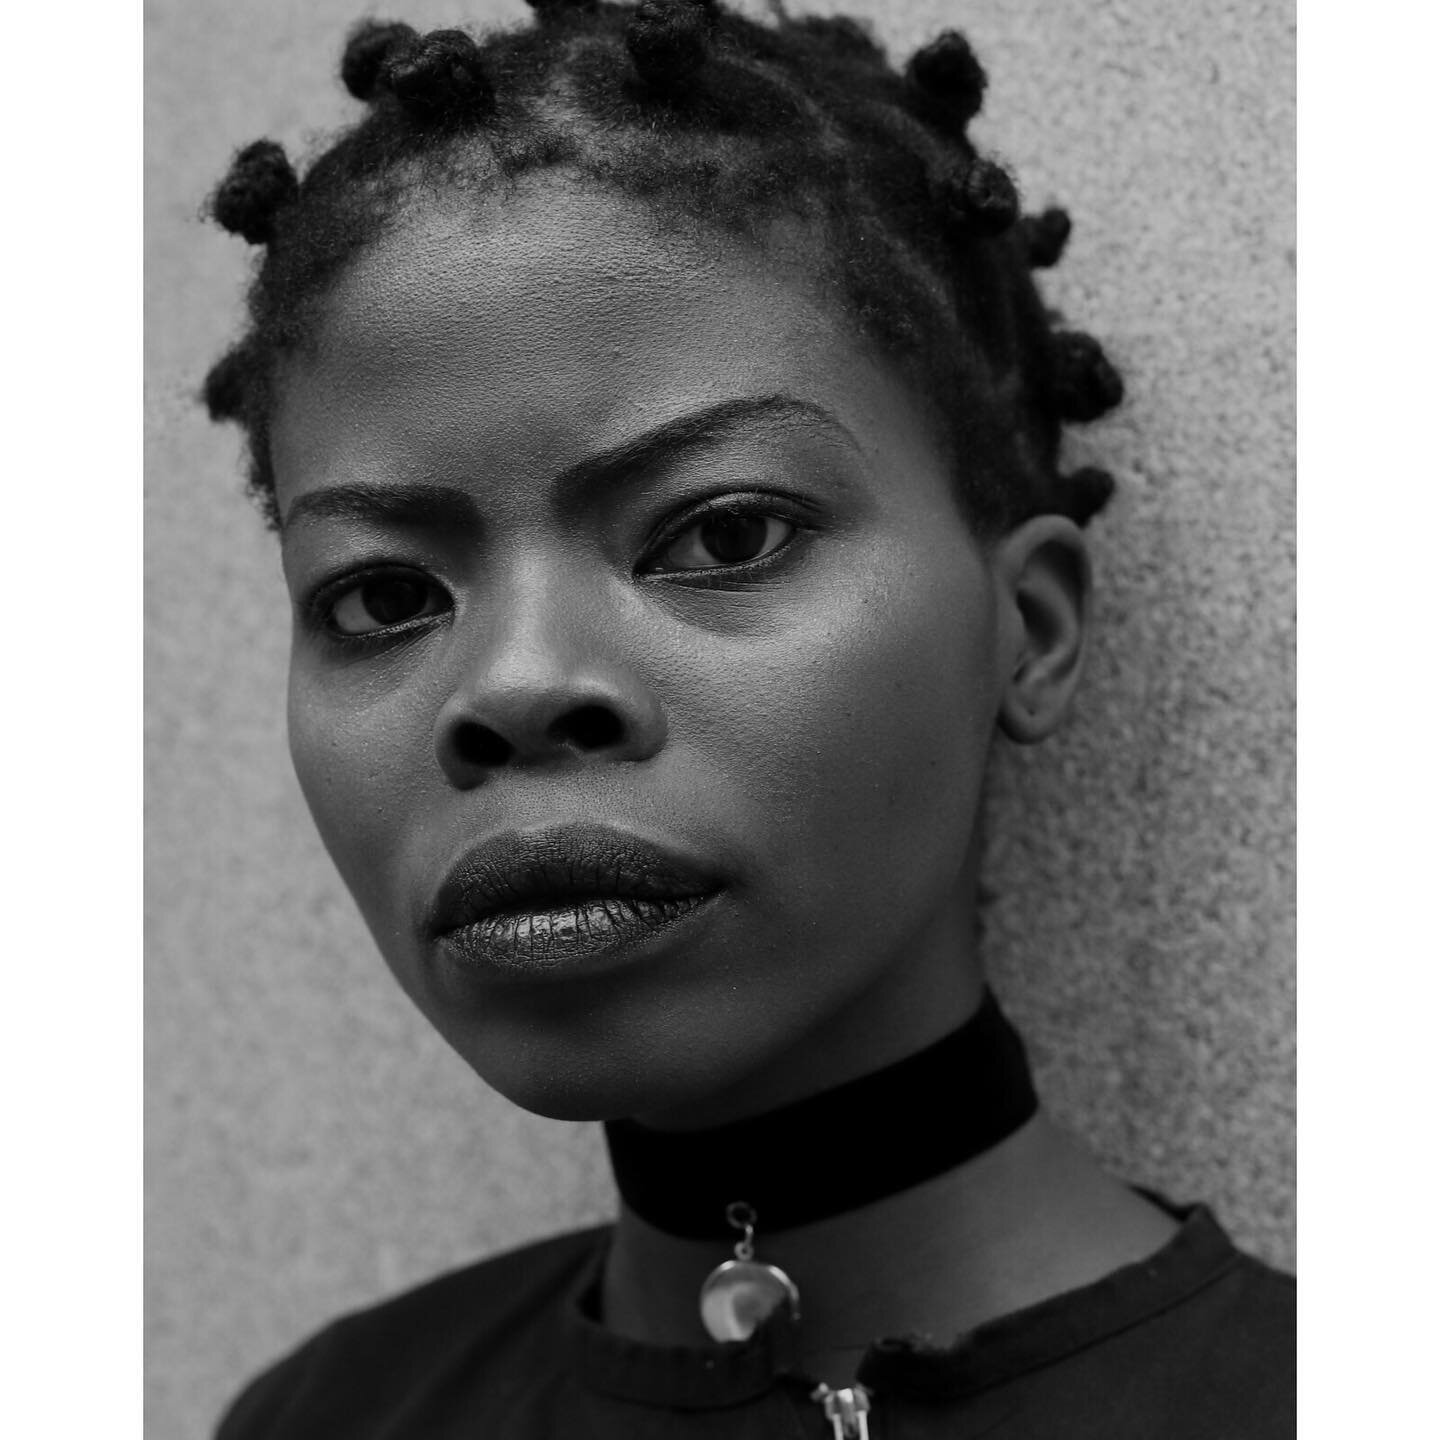 &lsquo;What draws me to the people I photograph is how they represent themselves, how they go about their day, how they dress up, for all of them it&rsquo;s bold, whether it&rsquo;s the hair, whether it&rsquo;s the clothing. I think there is an eleme